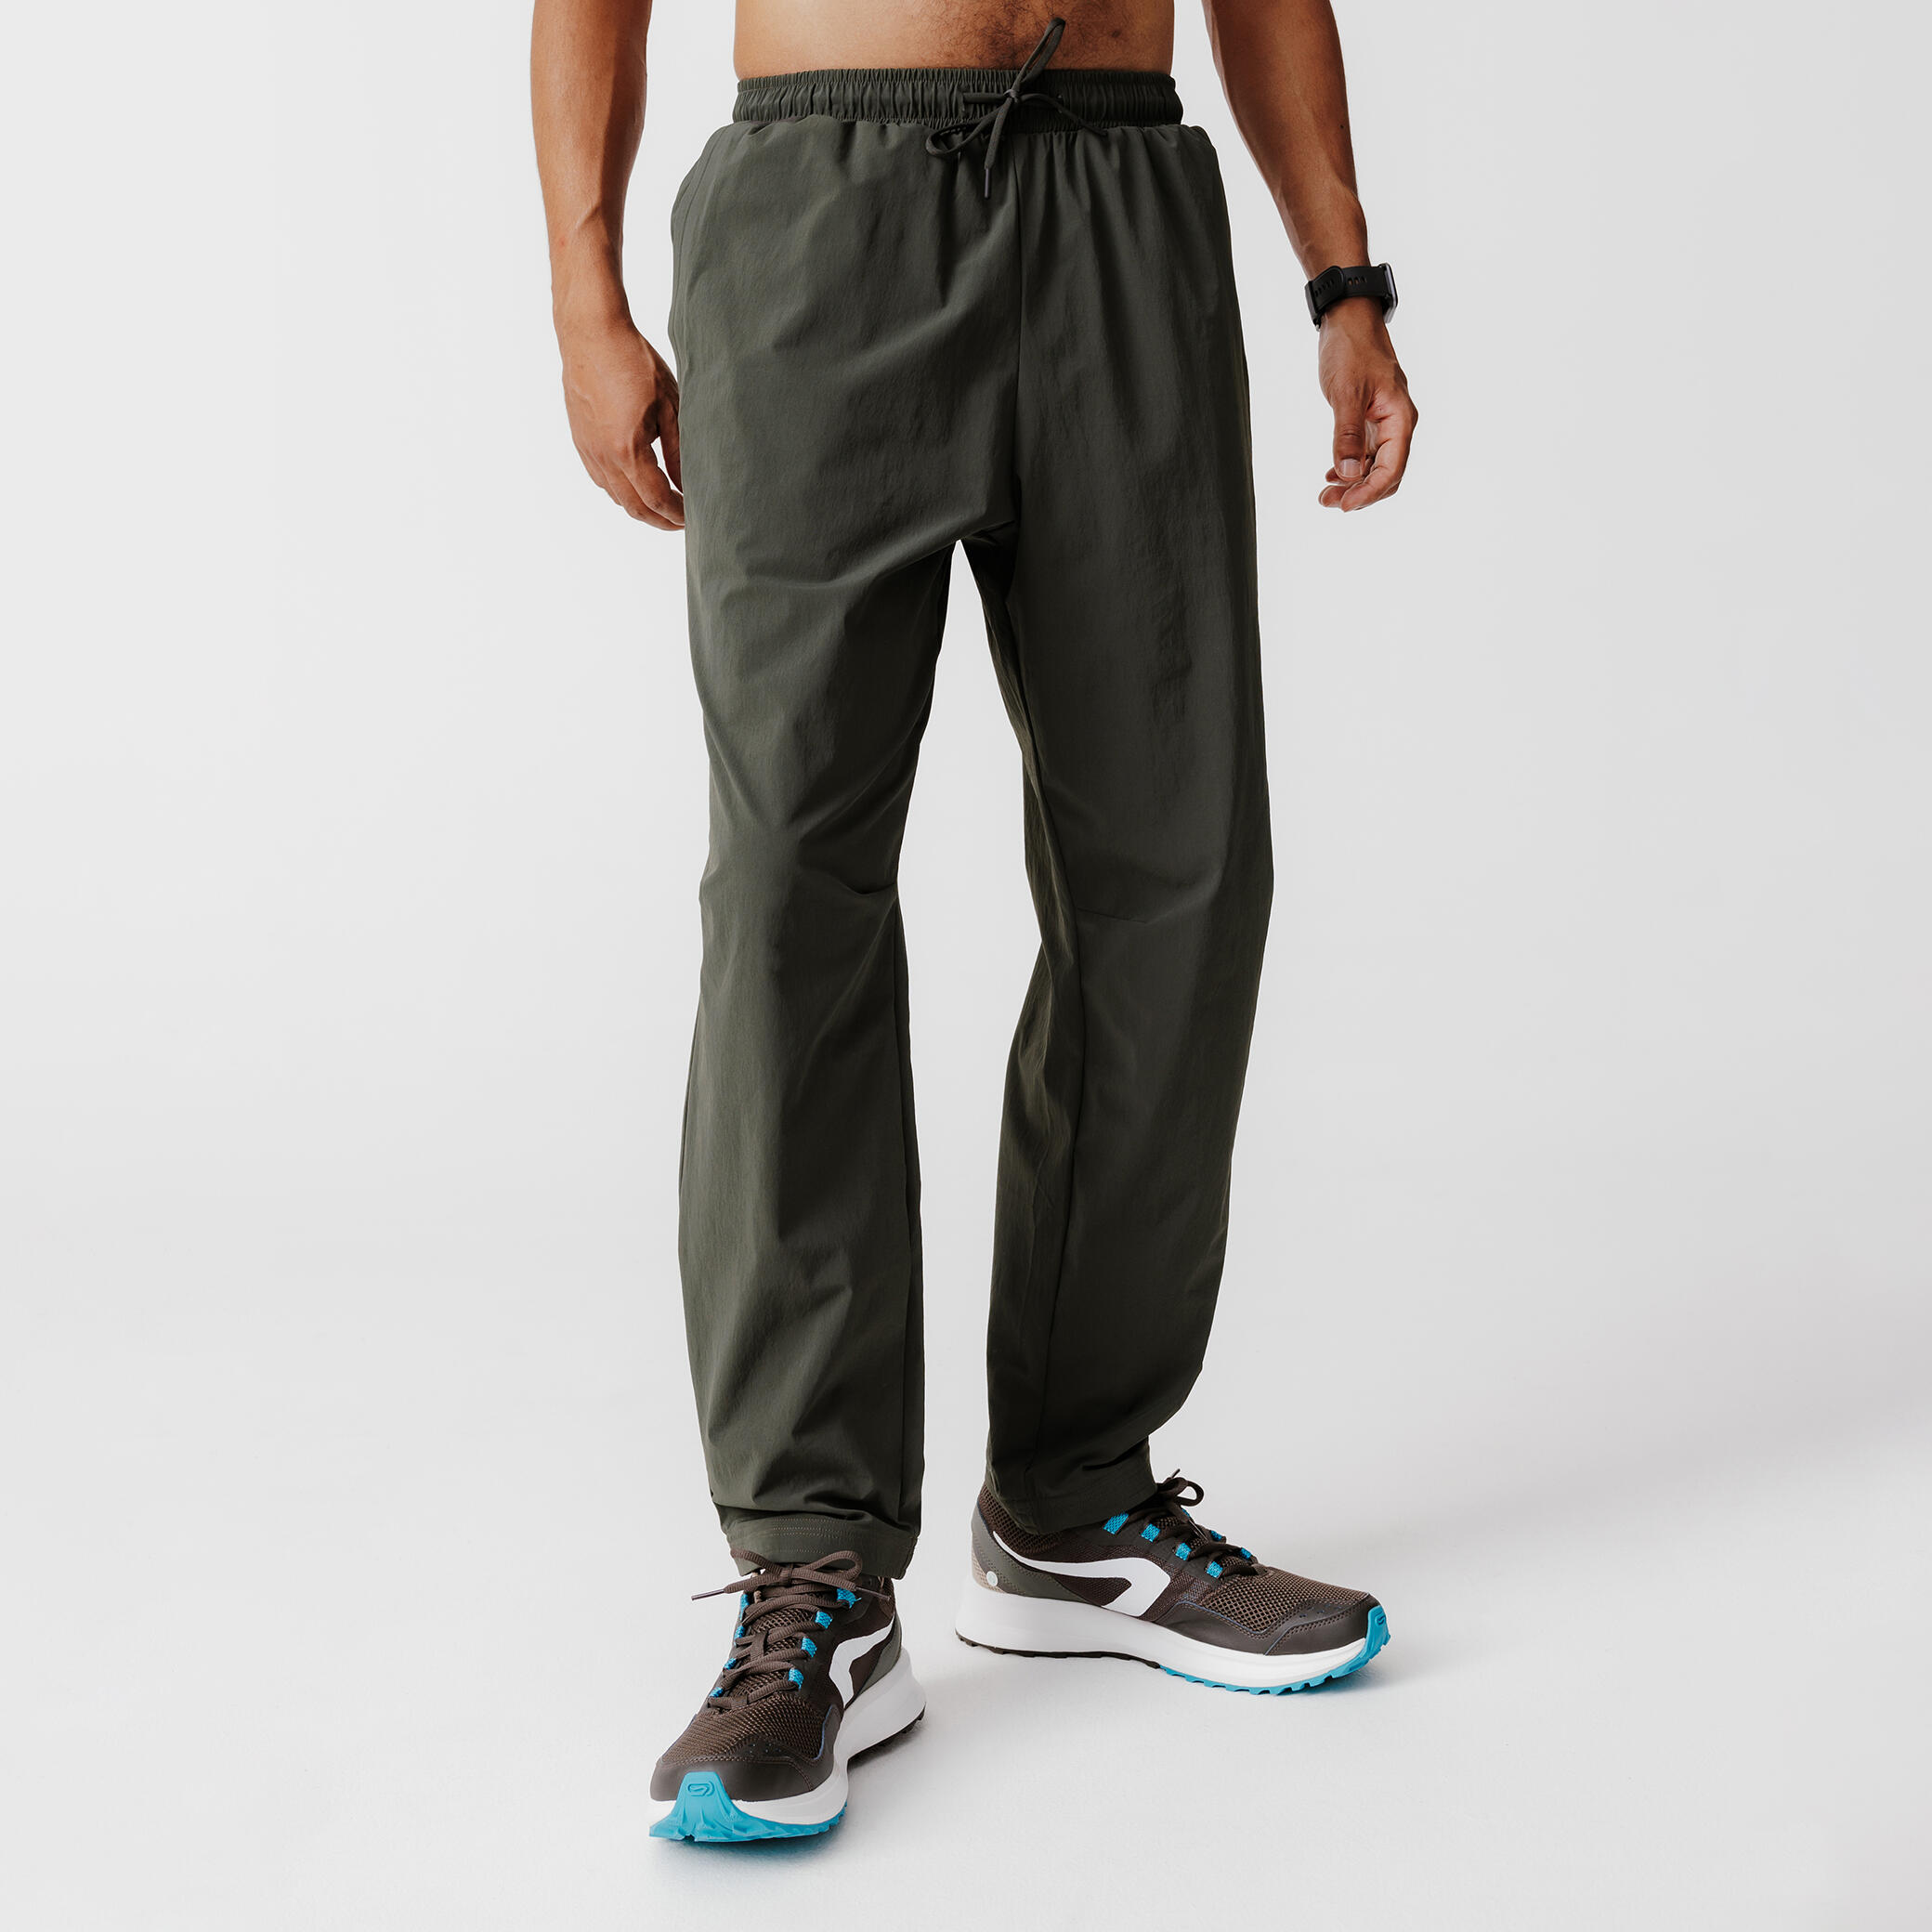 adidas Originals Reveal Material Mix Tracksuit Bottoms - Casual trousers -  Boozt.com